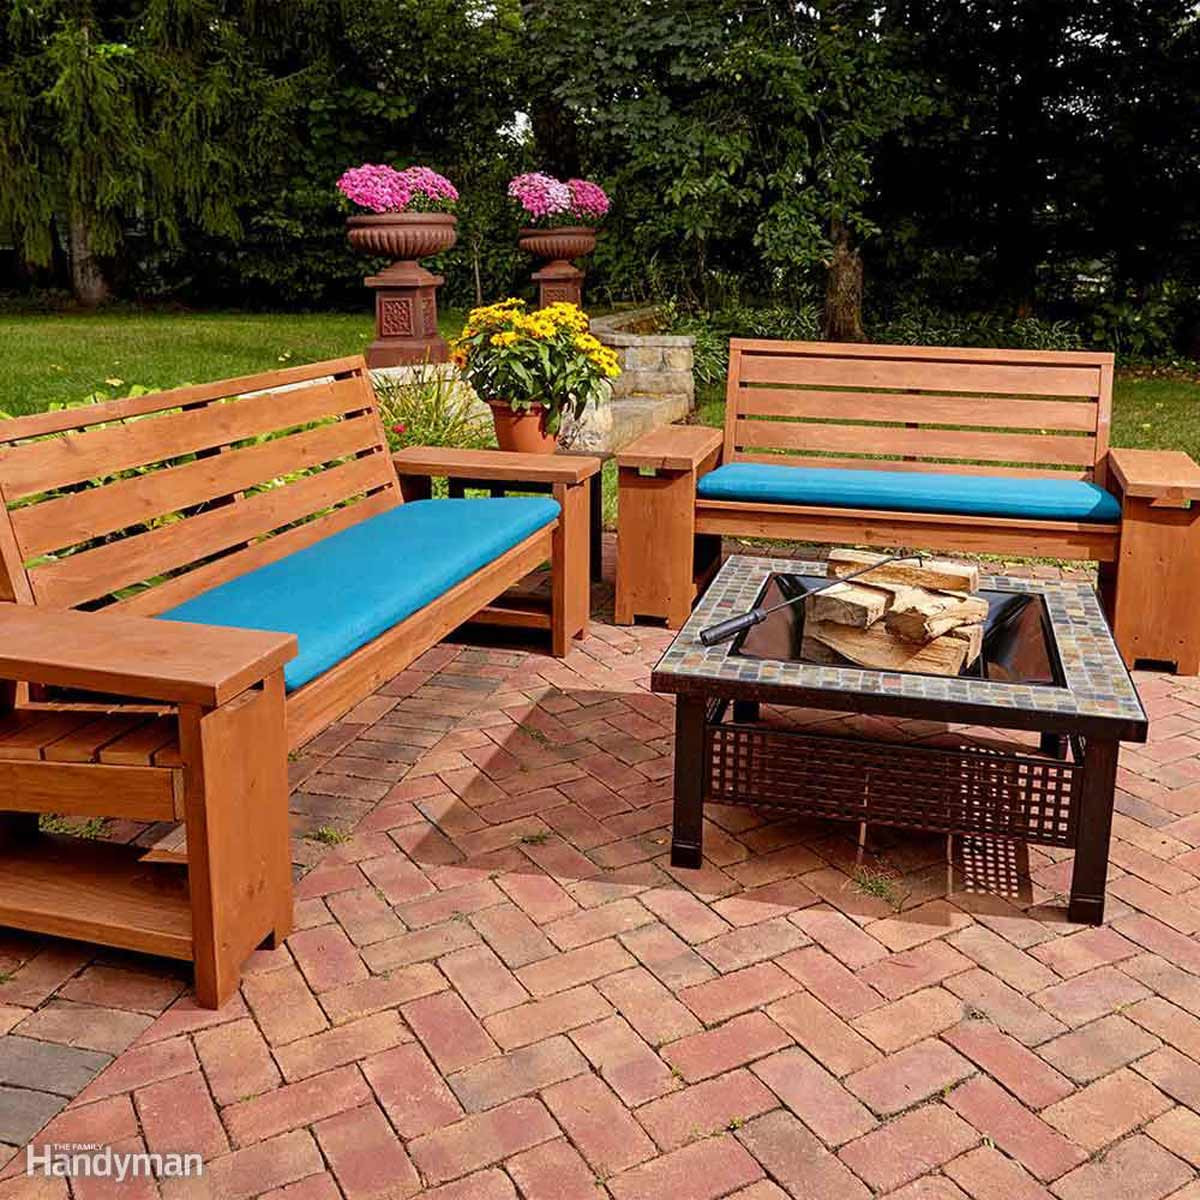 DIY Wooden Outdoor Furniture
 15 Awesome Plans for DIY Patio Furniture